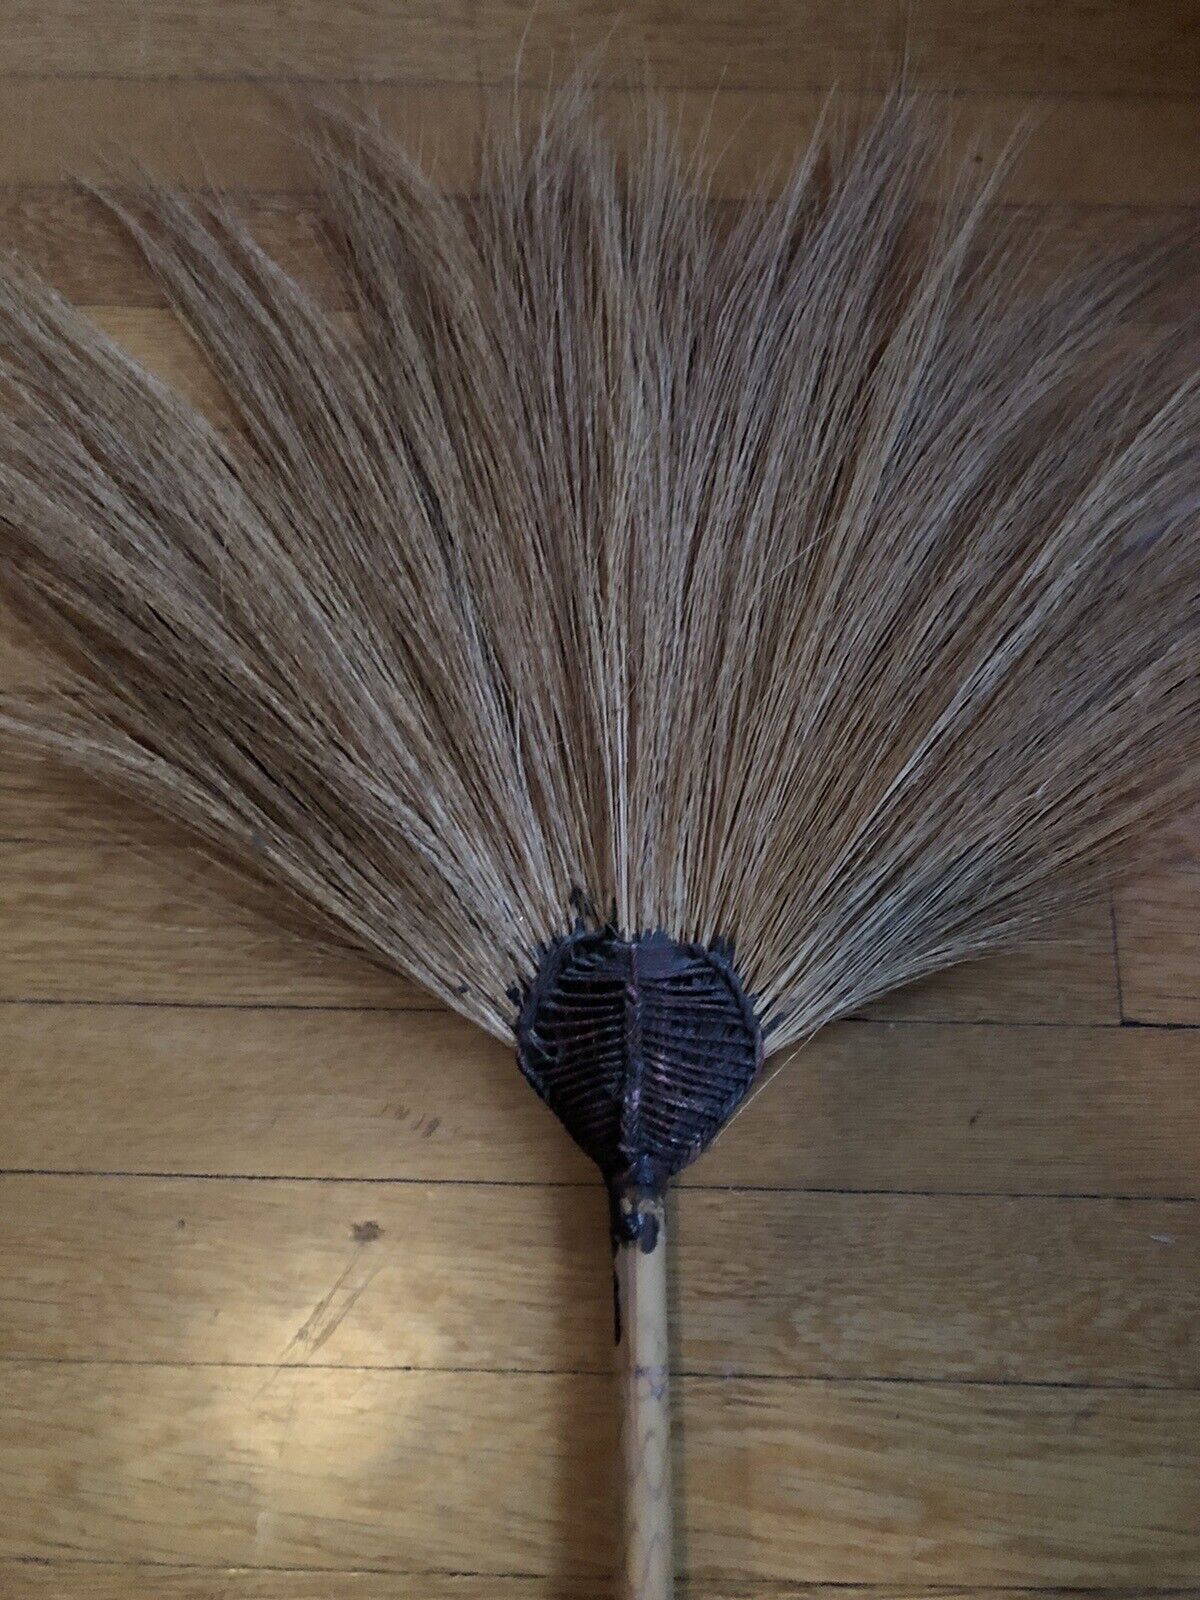 Vintage African Broom from either Malawi or Swaziland  1980's